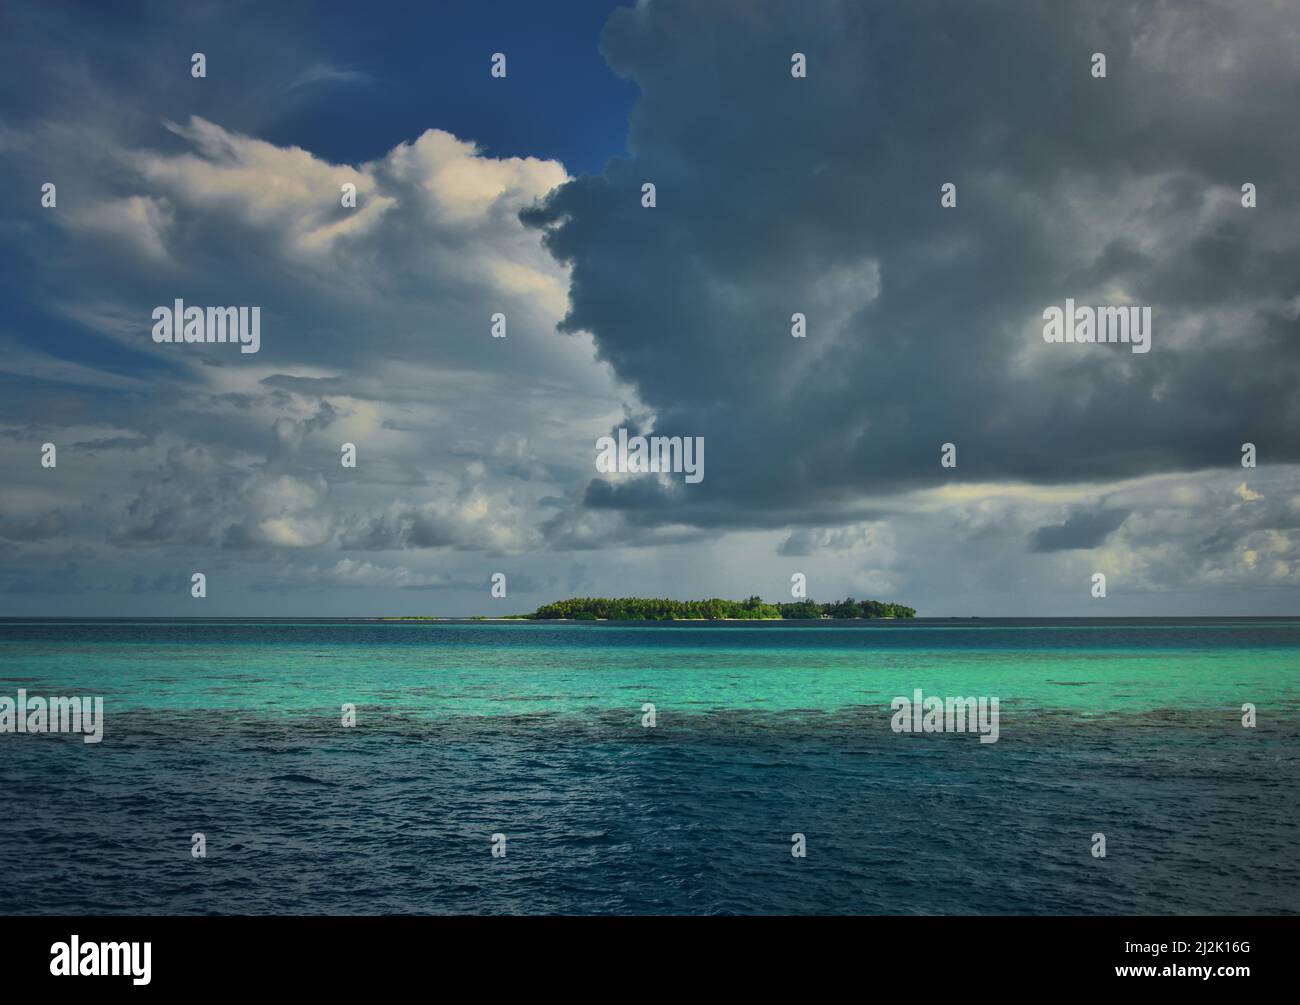 Storm clouds over a tropical island, Maldives Stock Photo